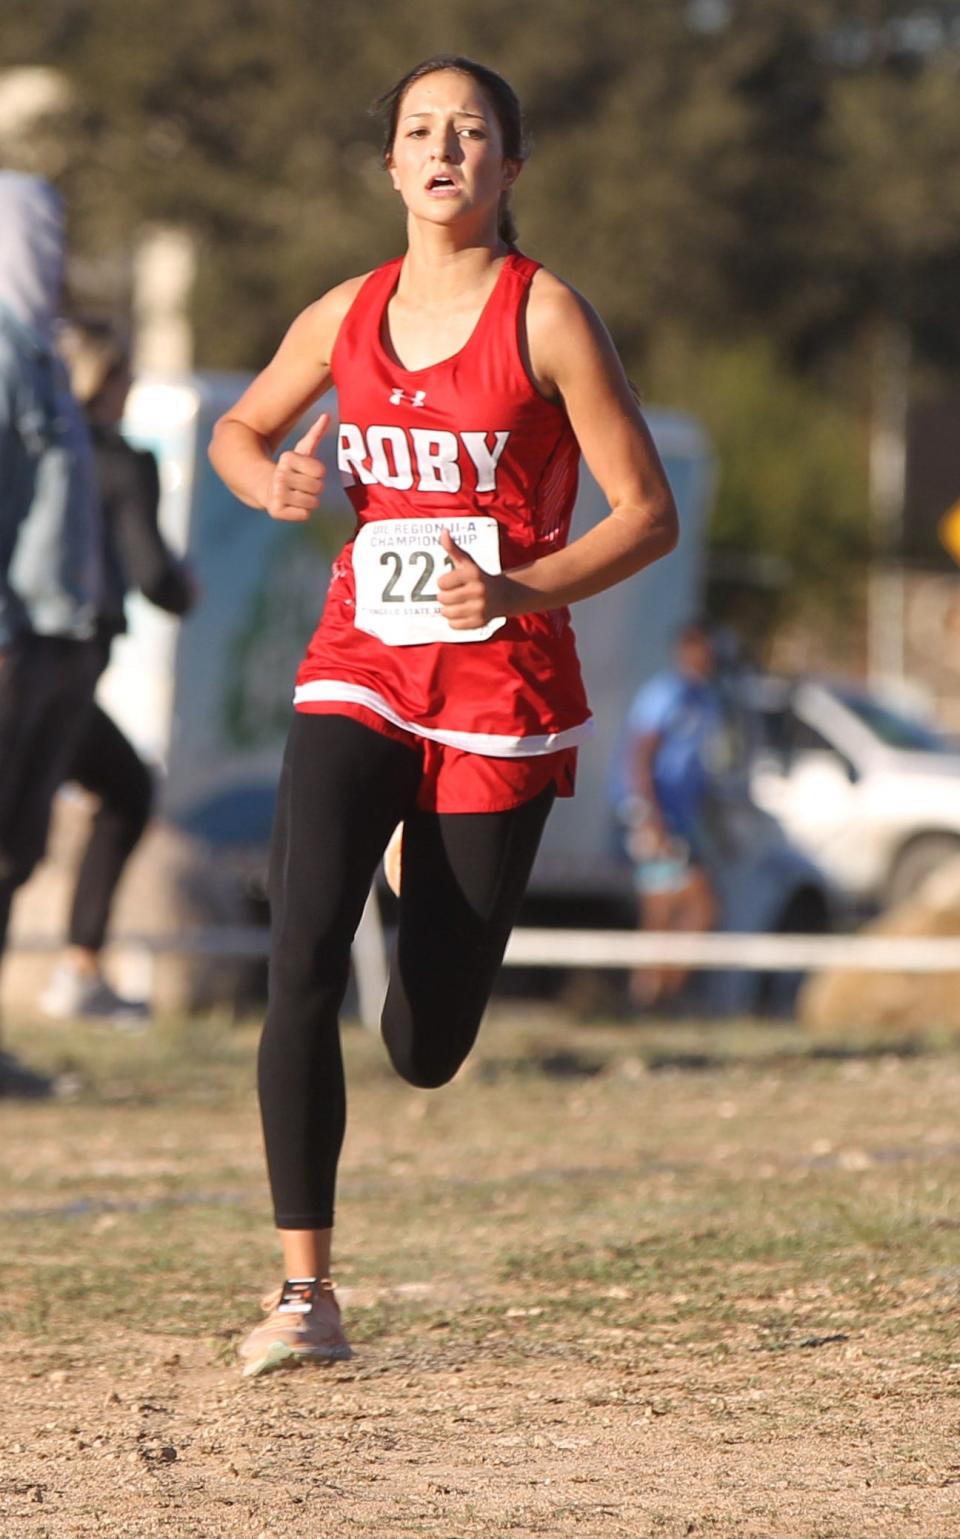 Roby Hailee Garmer rounds the curve and heads for the finish line in first place in the girls division at the Region II-1A Cross Country Championships on Oct. 25 at the Angelo State University Intramural Fields.